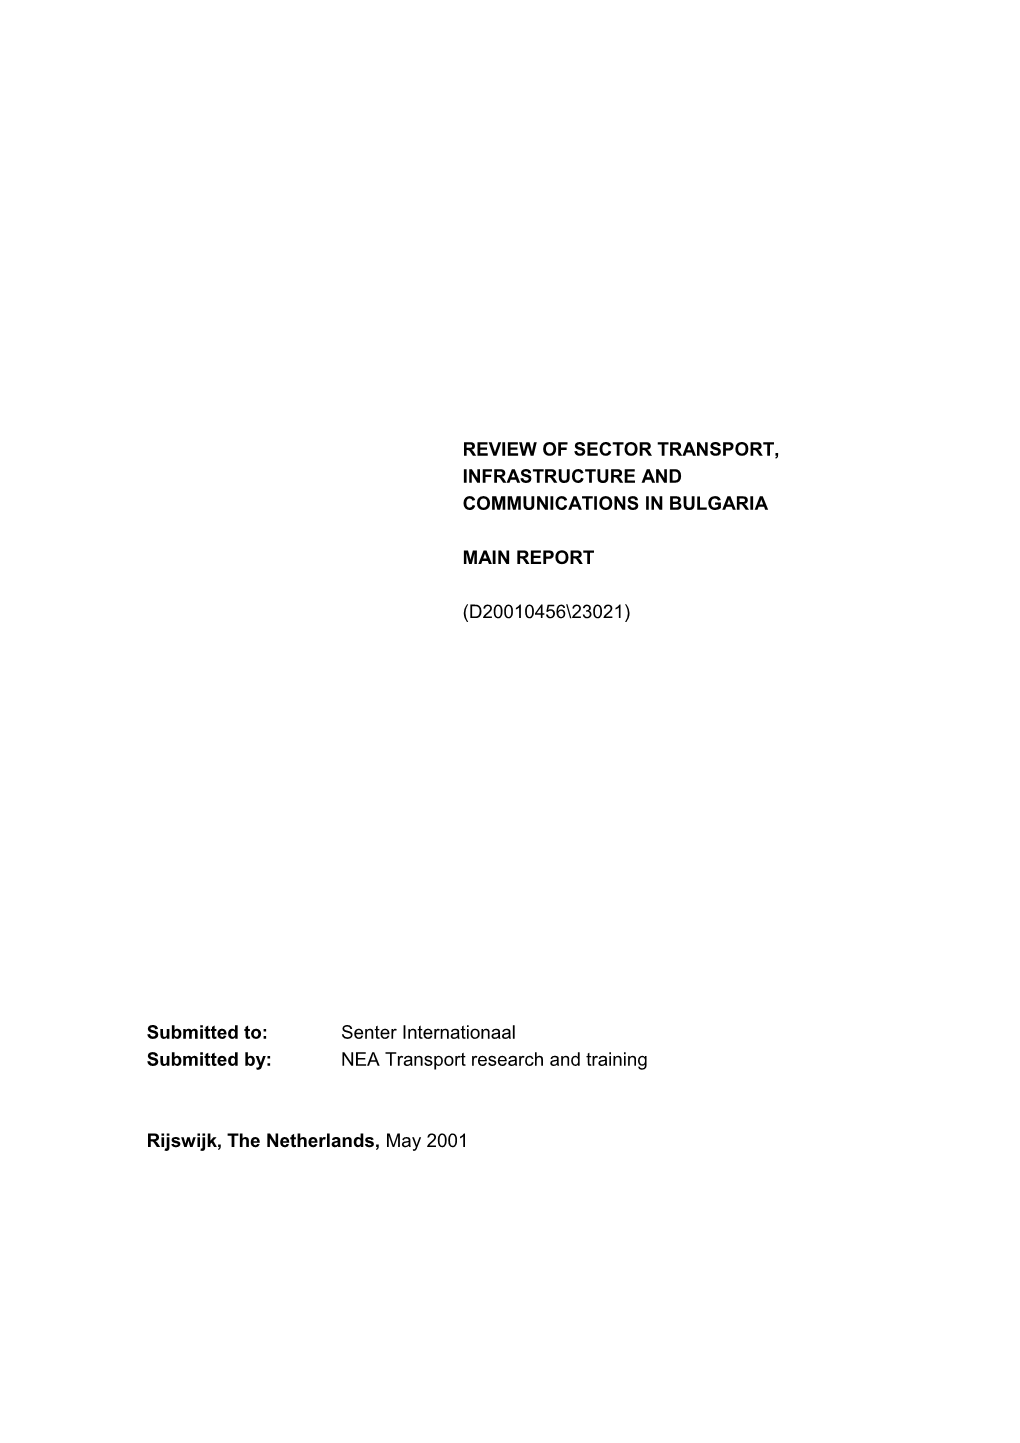 Review of Sector Transport, Infrastructure and Communications Bulgaria Main Report Deze